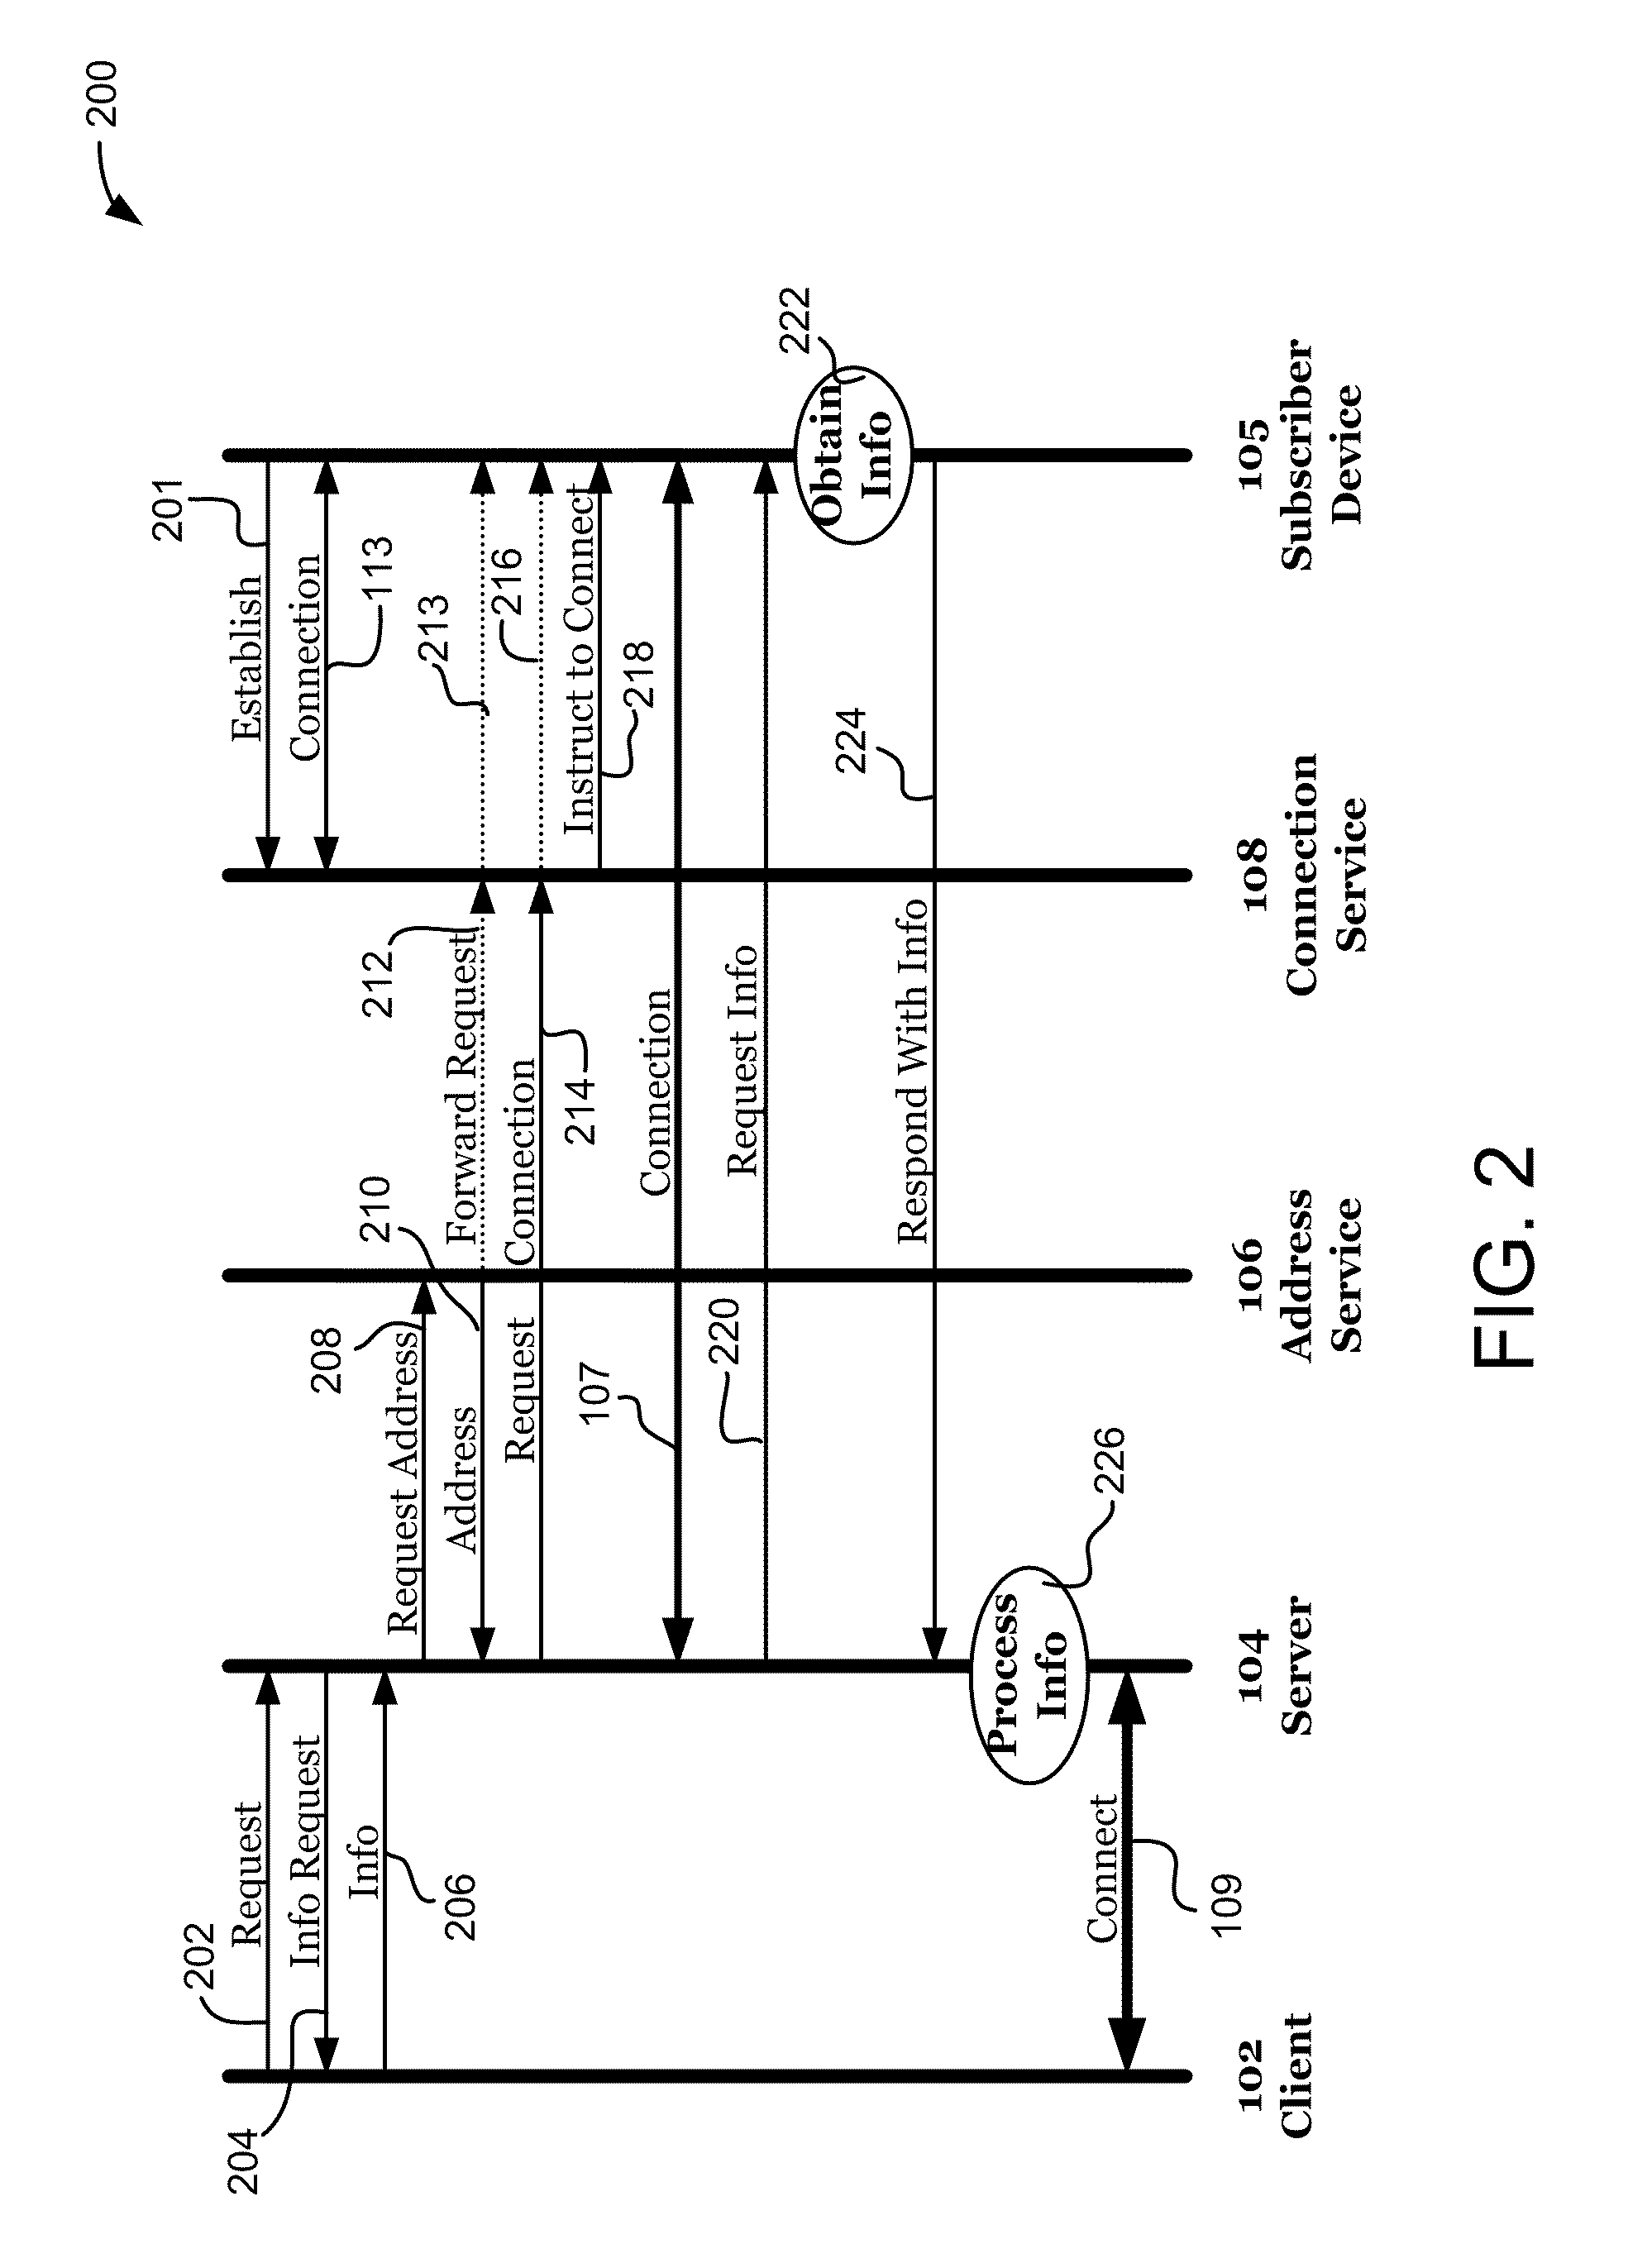 Systems and methods for authorizing access to network services using information obtained from subscriber equipment